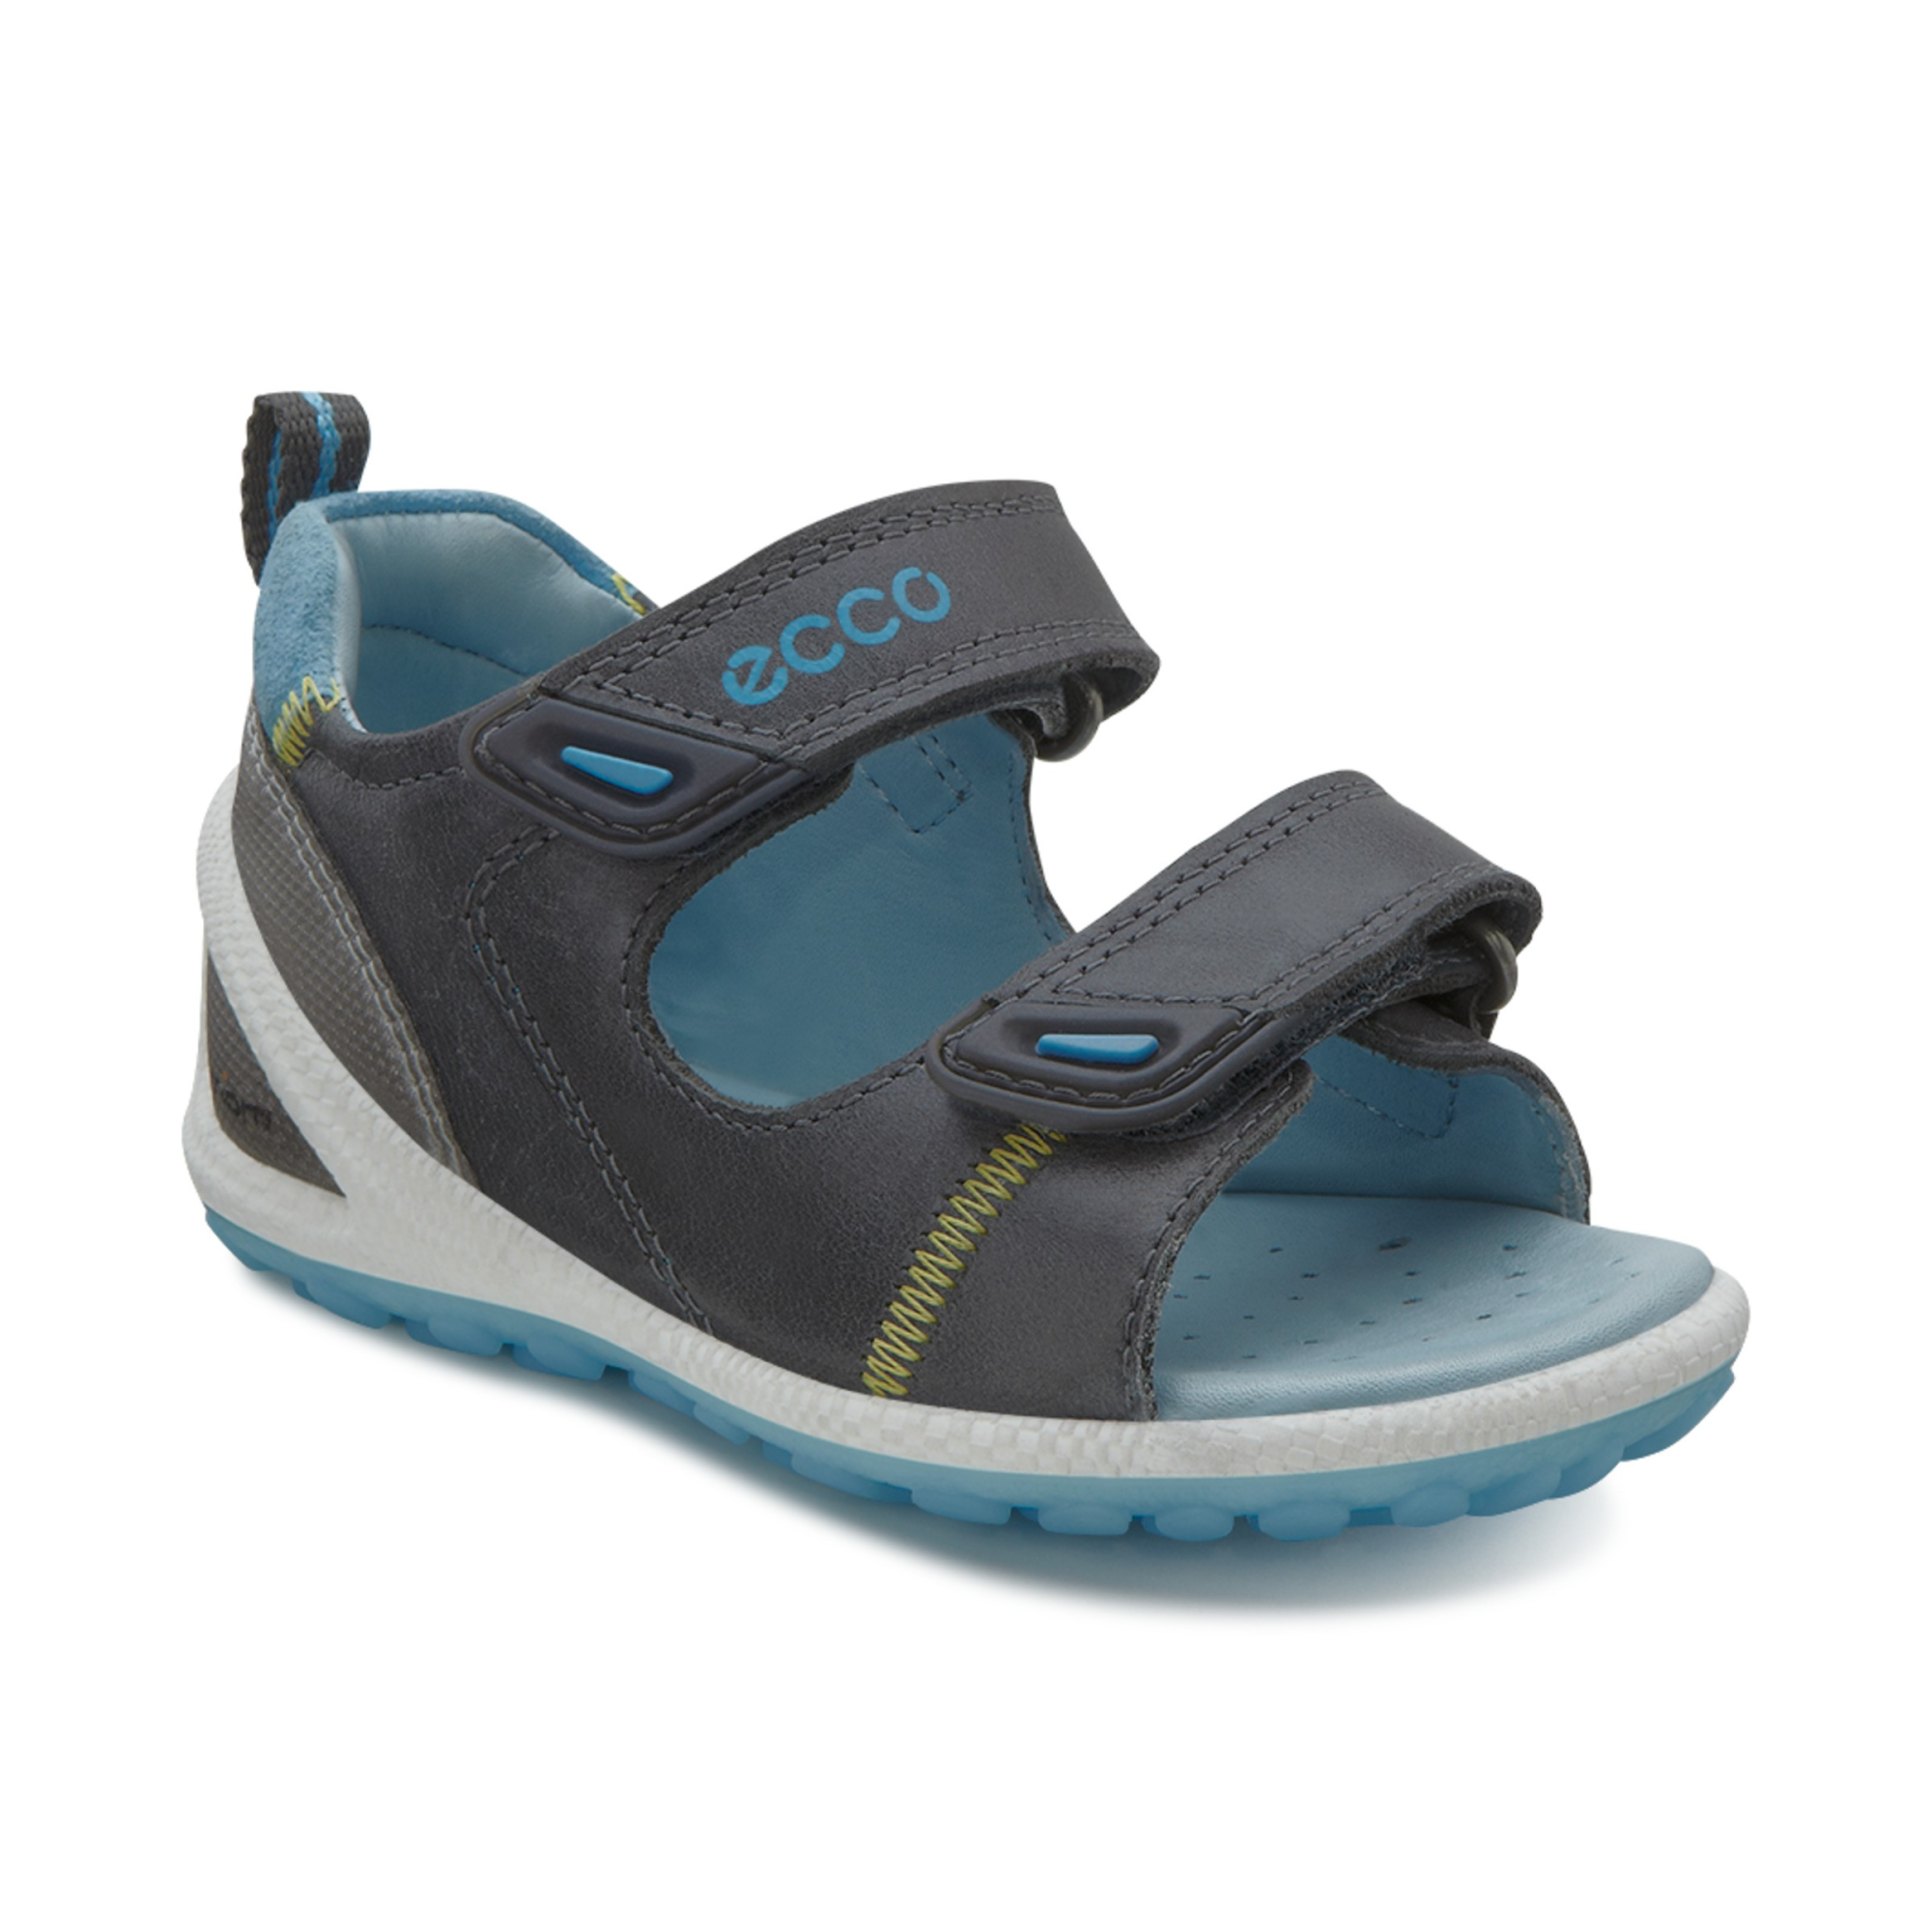 Ecco BIOM Lite Infants Sandal 26 - Products - Veryk Mall - many product, quick response, safe your money!